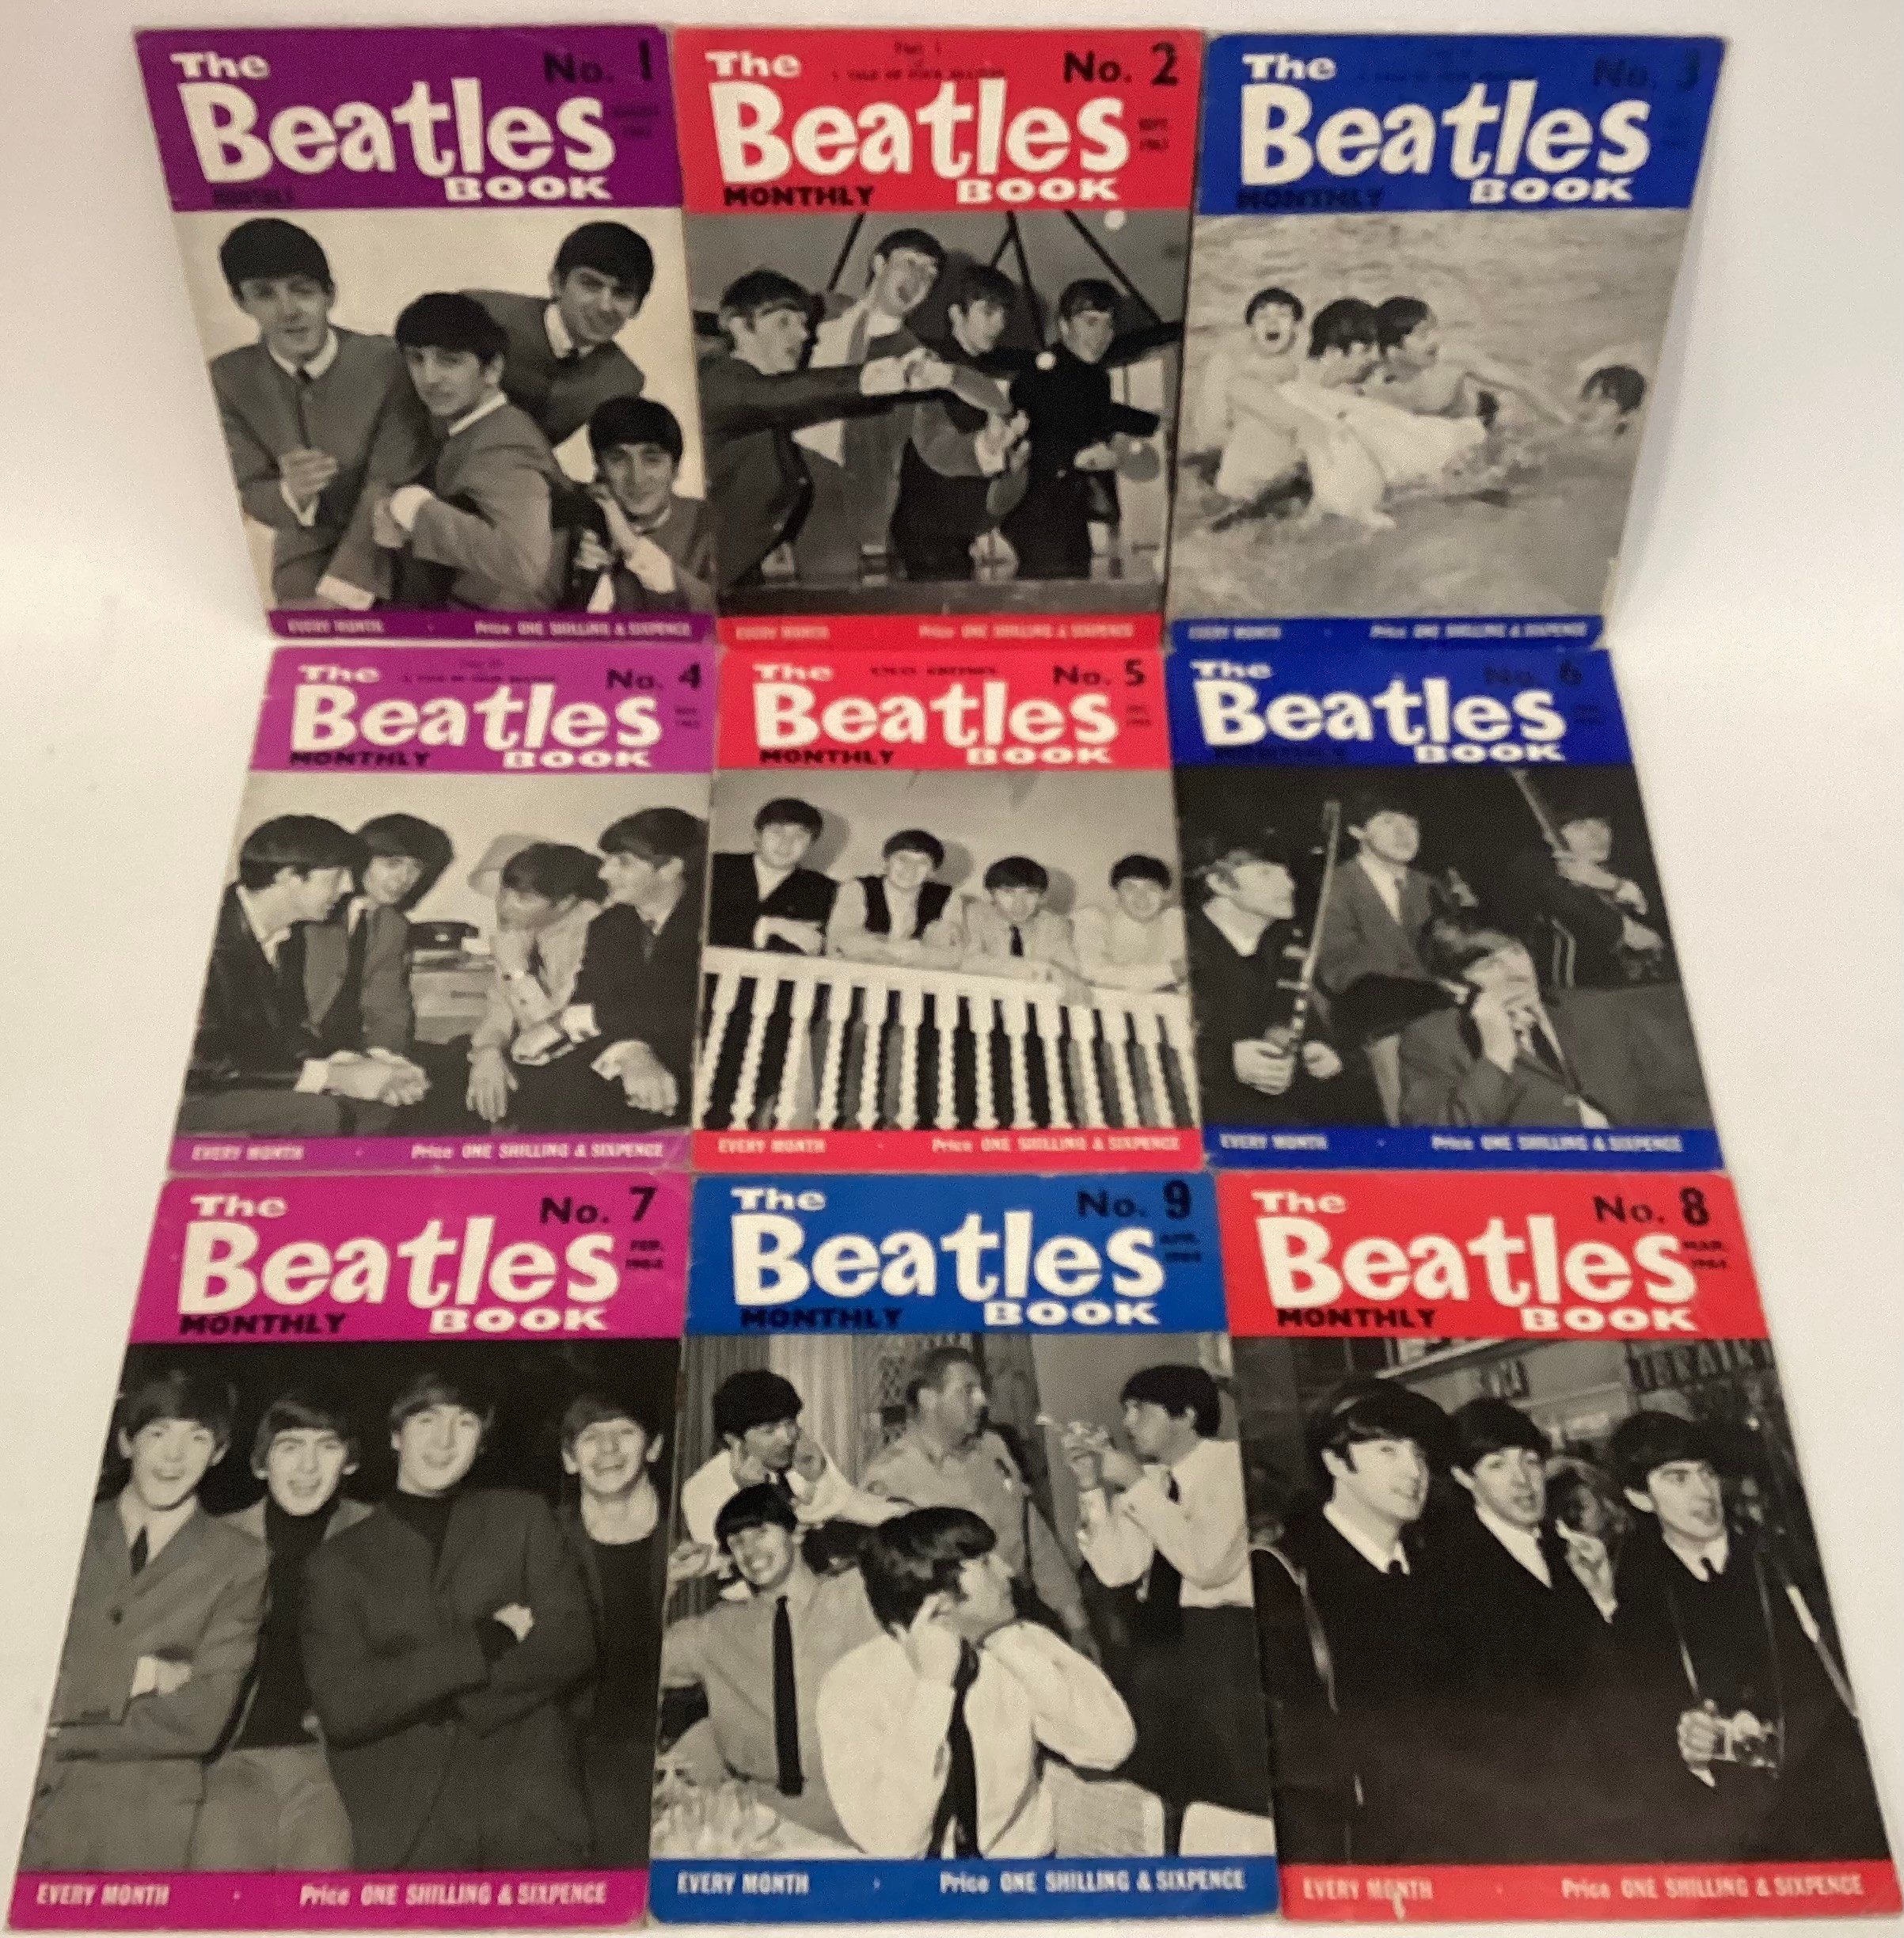 COLLECTION OF EPHEMERA FROM THE BEATLES. Nice collection of various items in print from The Beatles. - Image 5 of 9